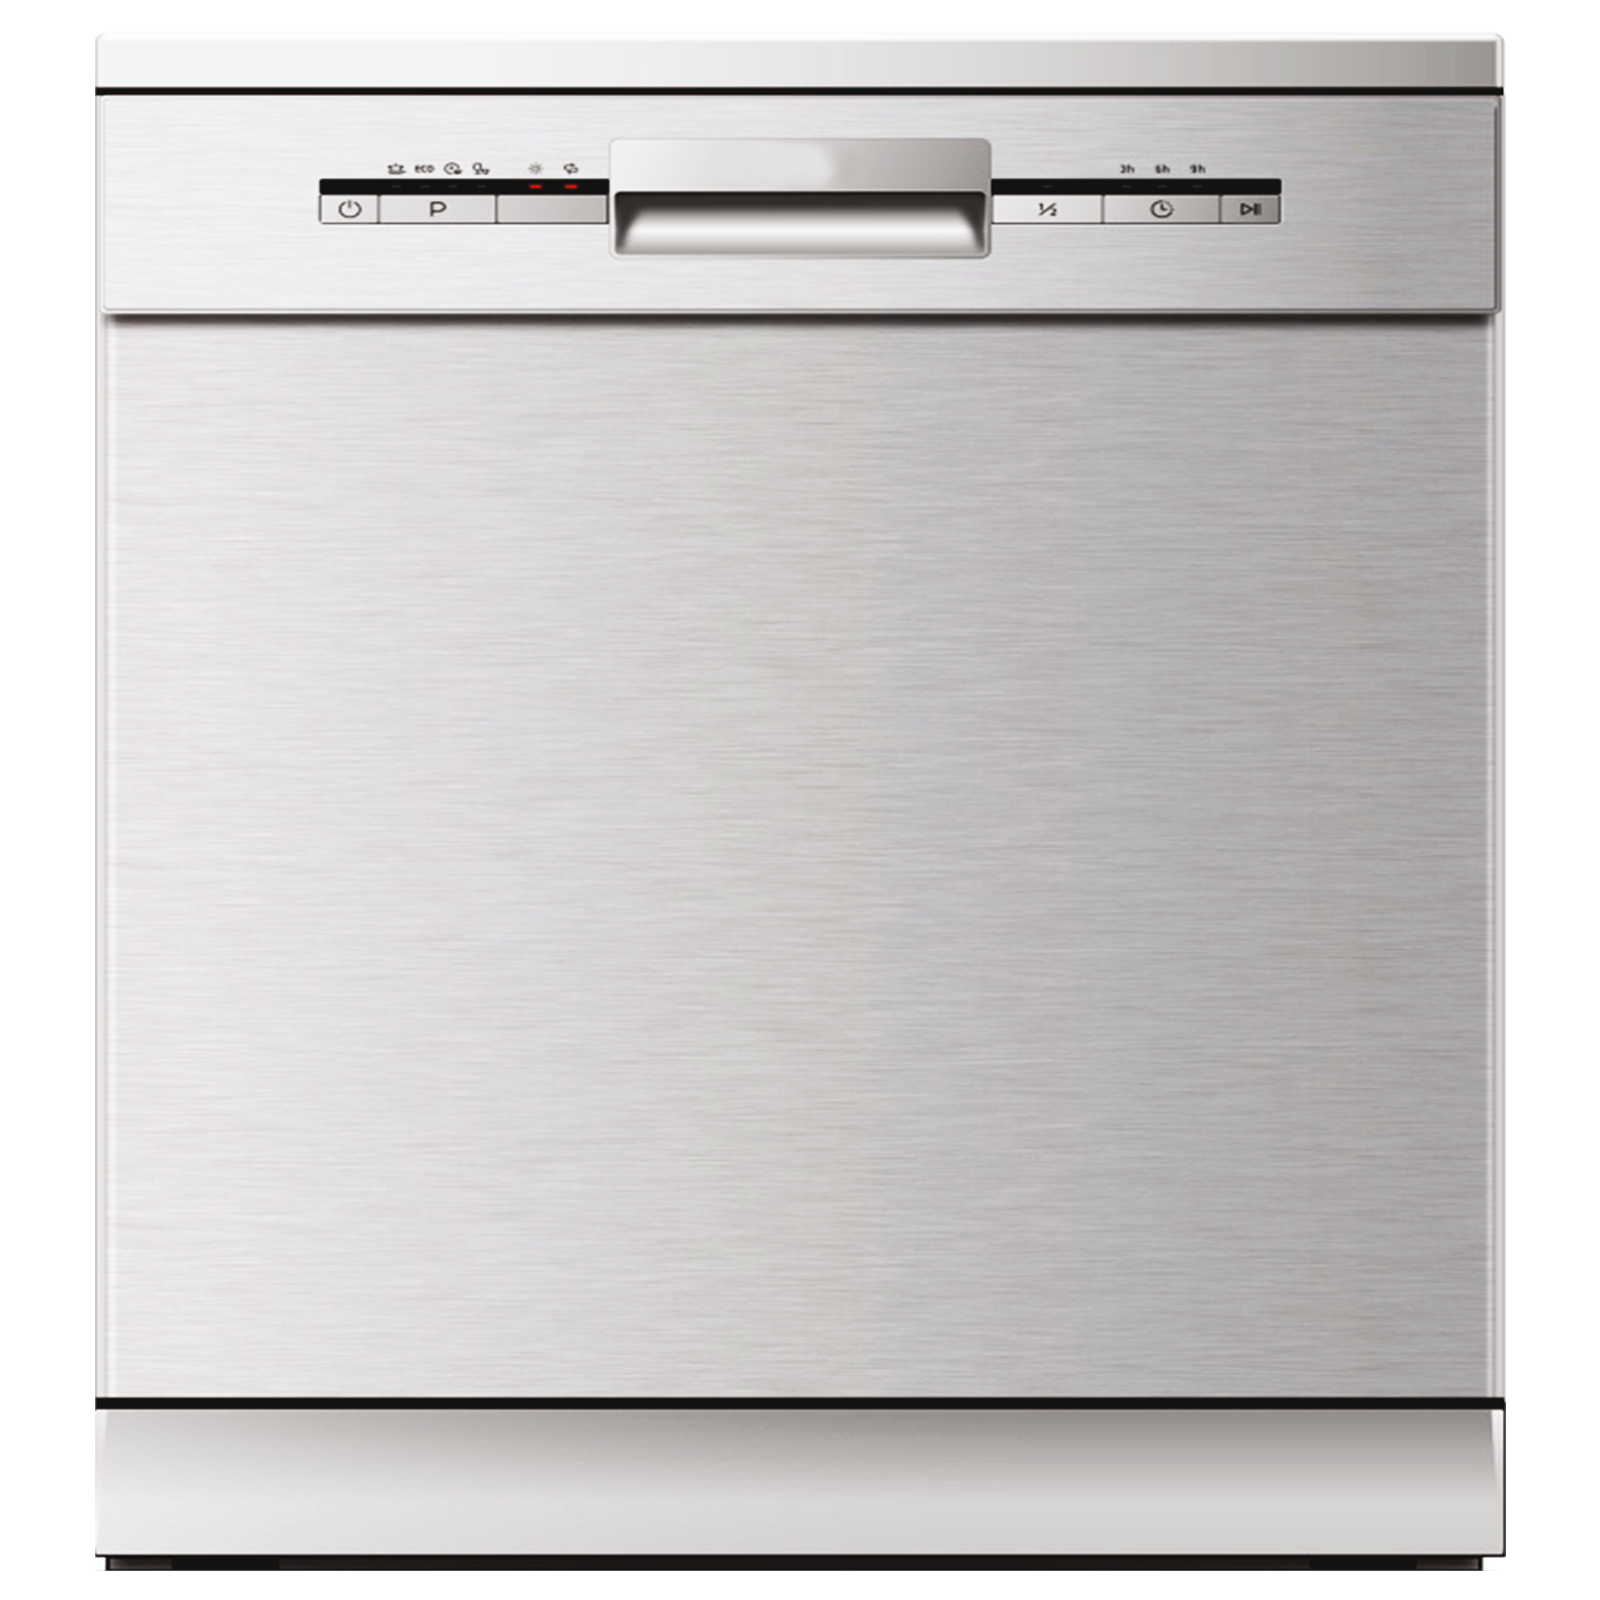 Elica 14 Place Setting Built-in Dishwasher (6 Wash Programs, WQP12-7735HR, Stainless Steel)_1